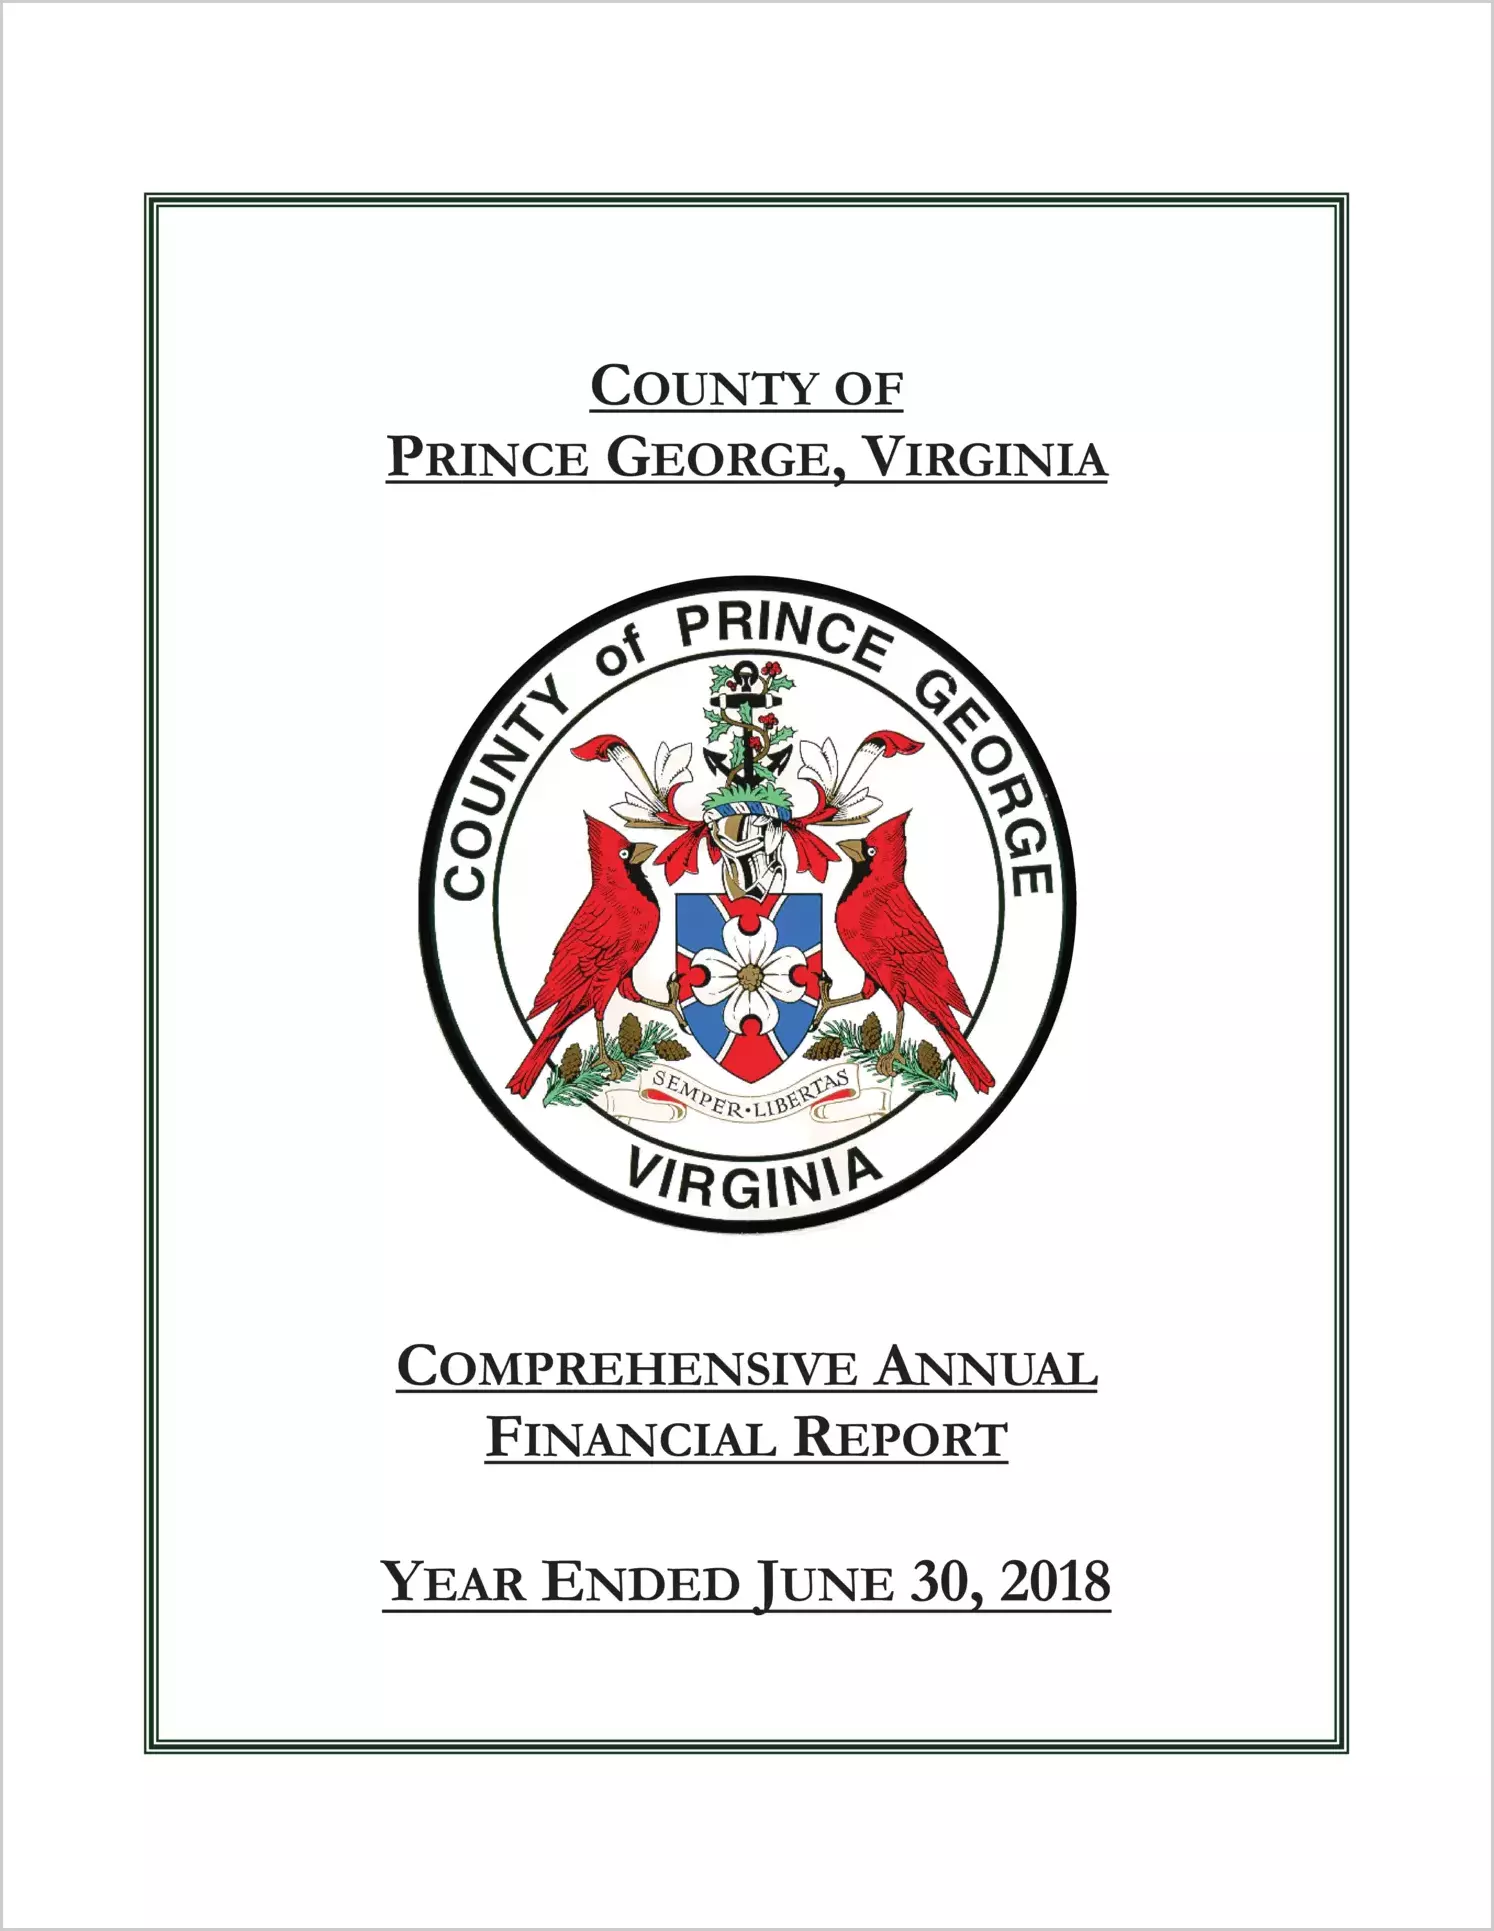 2018 Annual Financial Report for County of Prince George